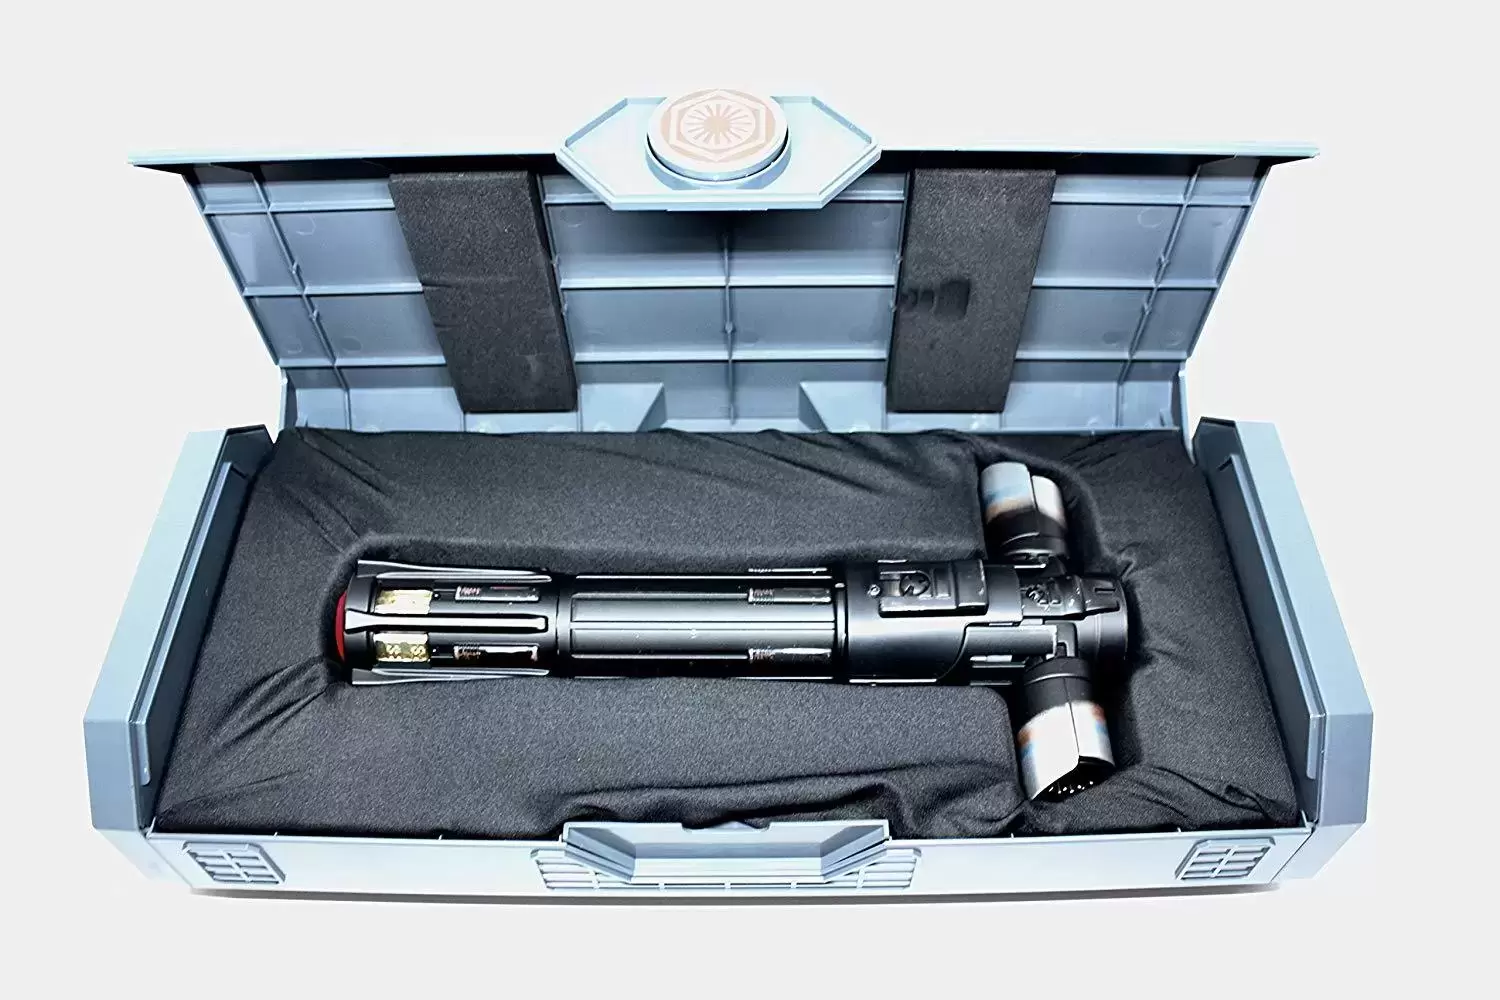 Lightsabers And Roleplay Items - Legacy Lightsaber - Kylo Ren Lightsaber